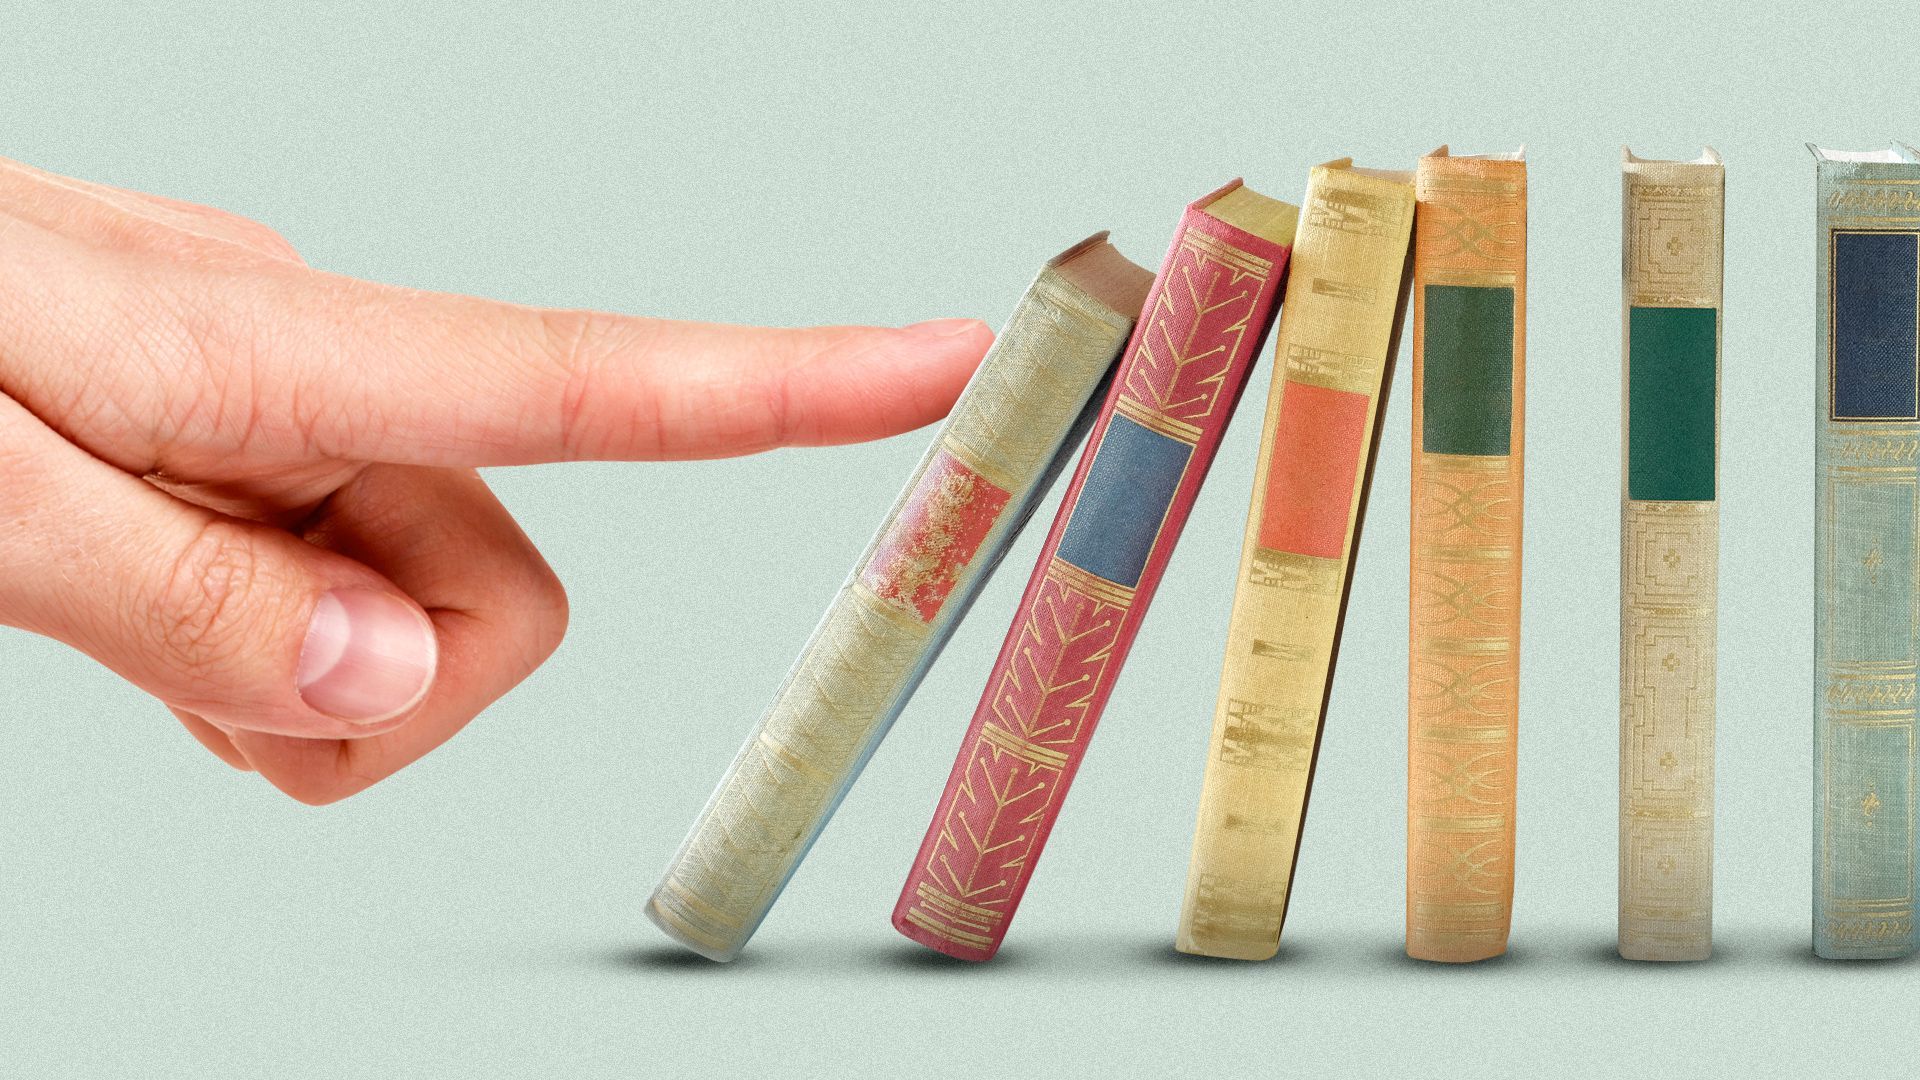 Illustration of a finger pushing a line of books, stacked side by side like dominoes.